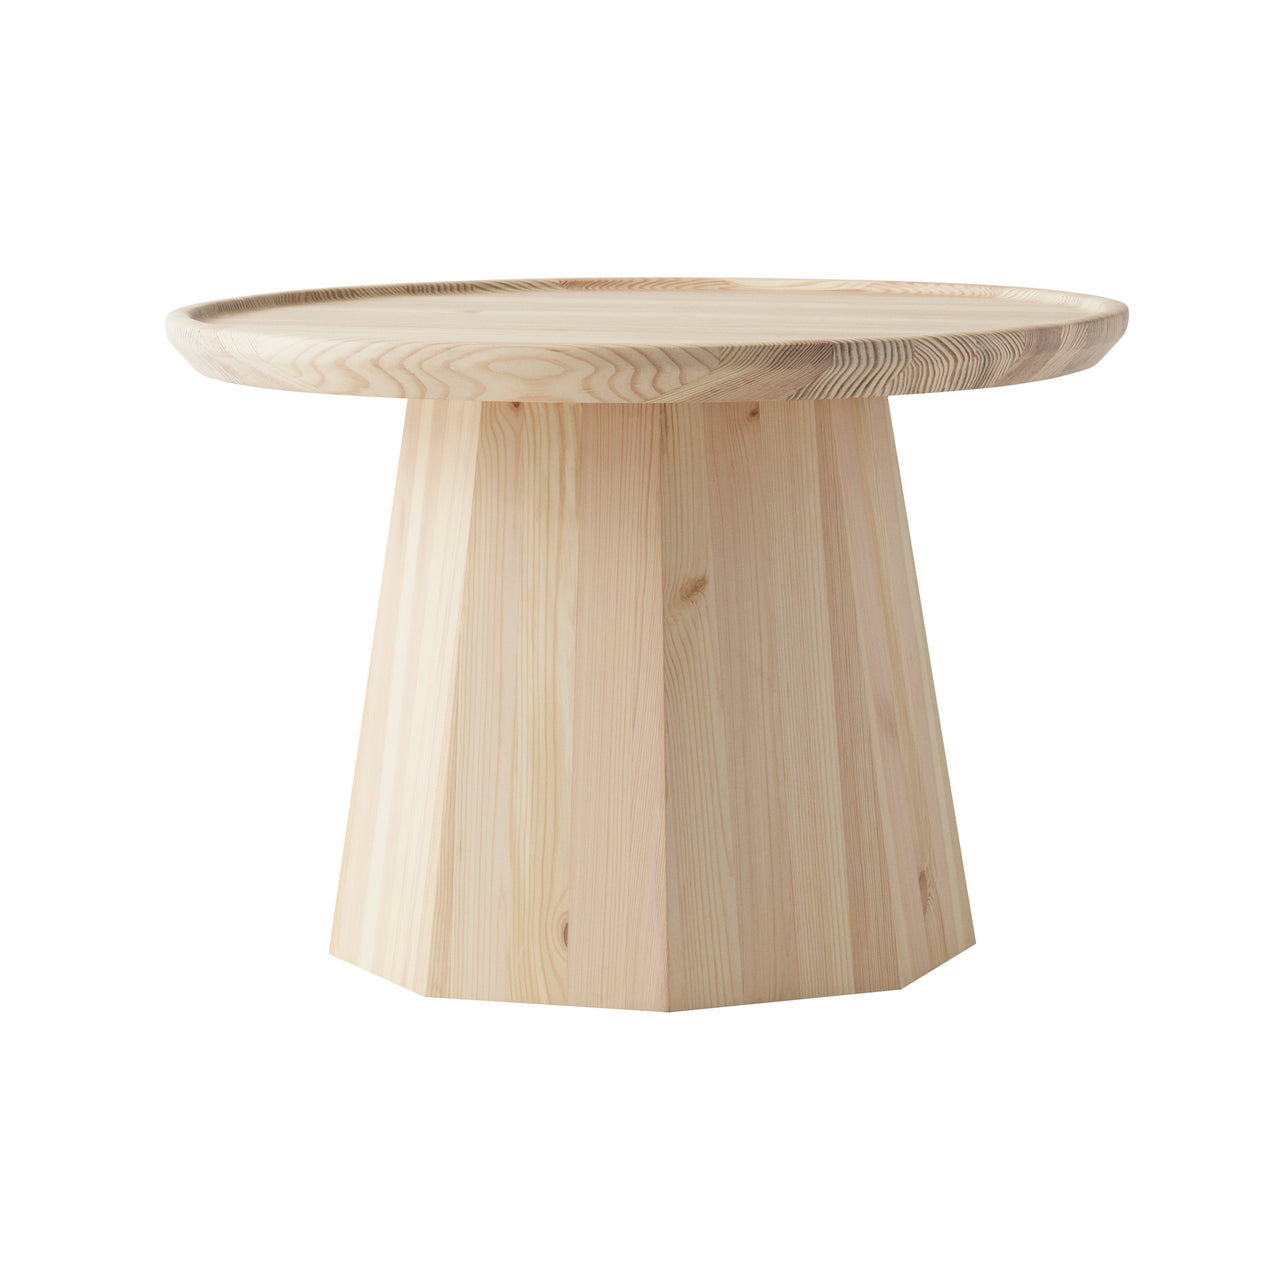 Pine Table: Large - 25.6